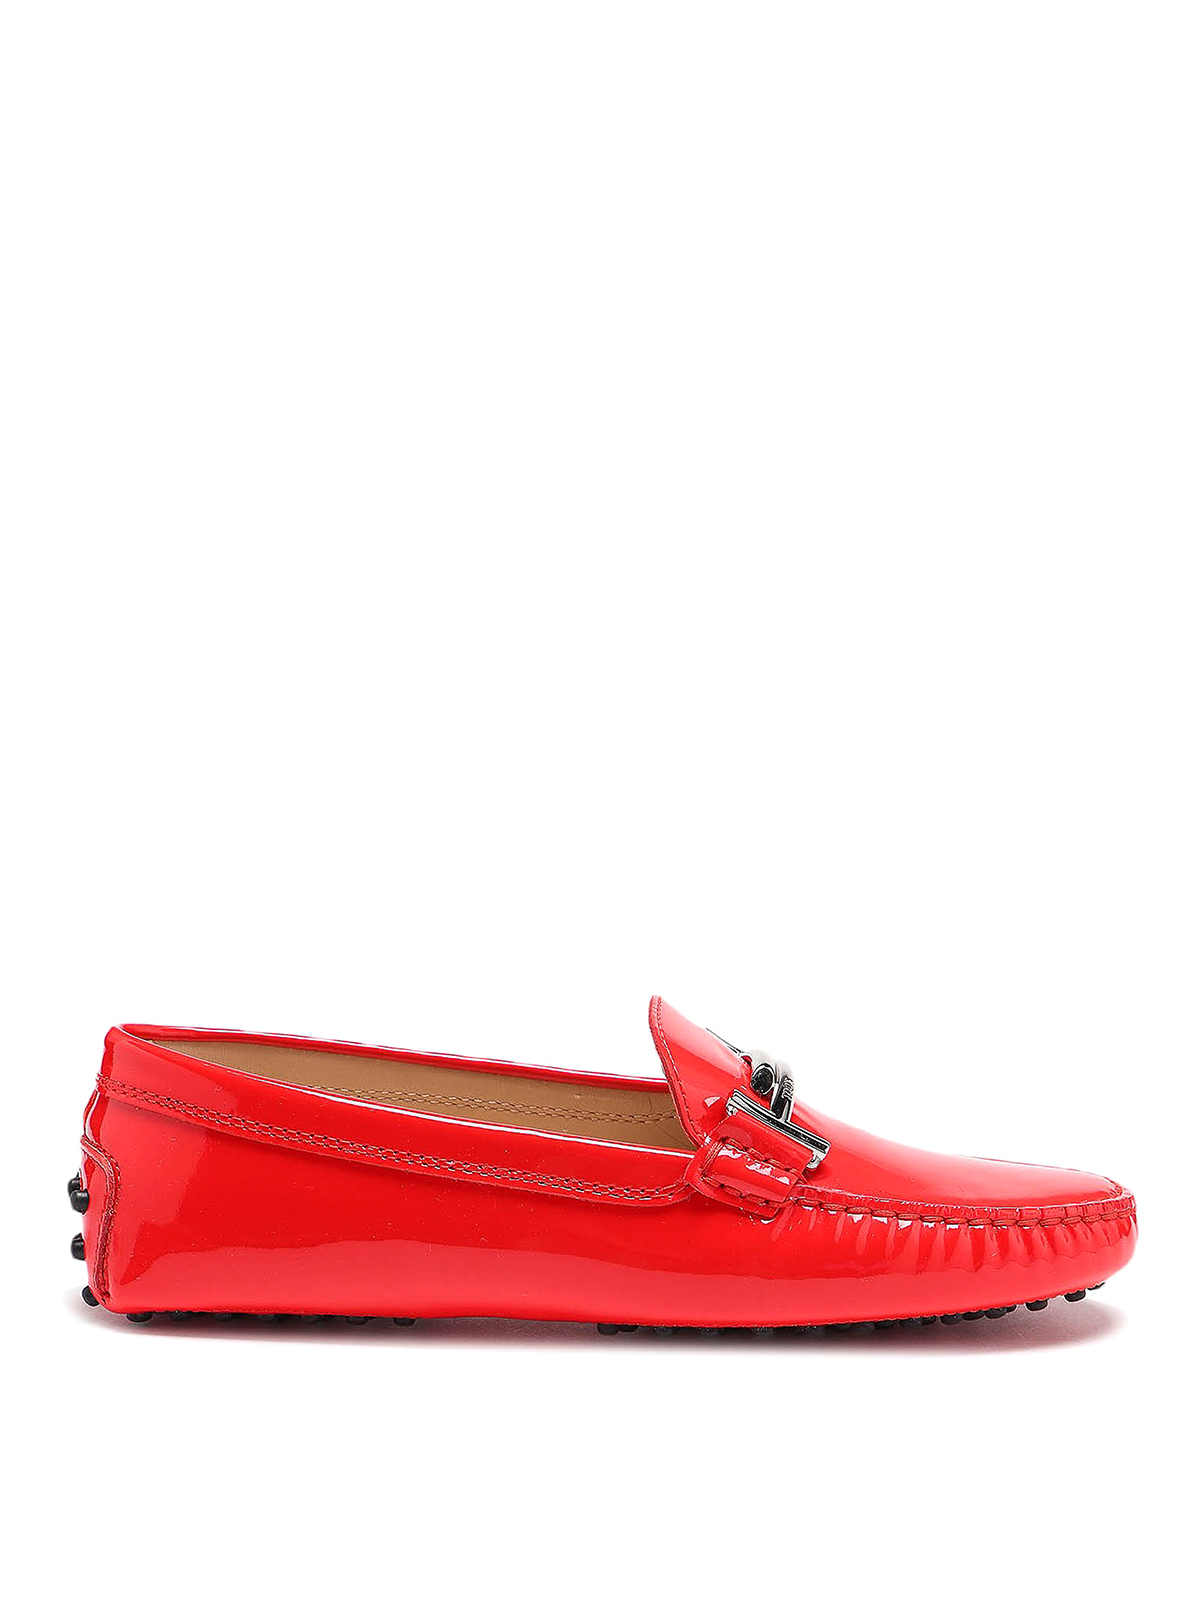 Gommino red patent leather loafers 